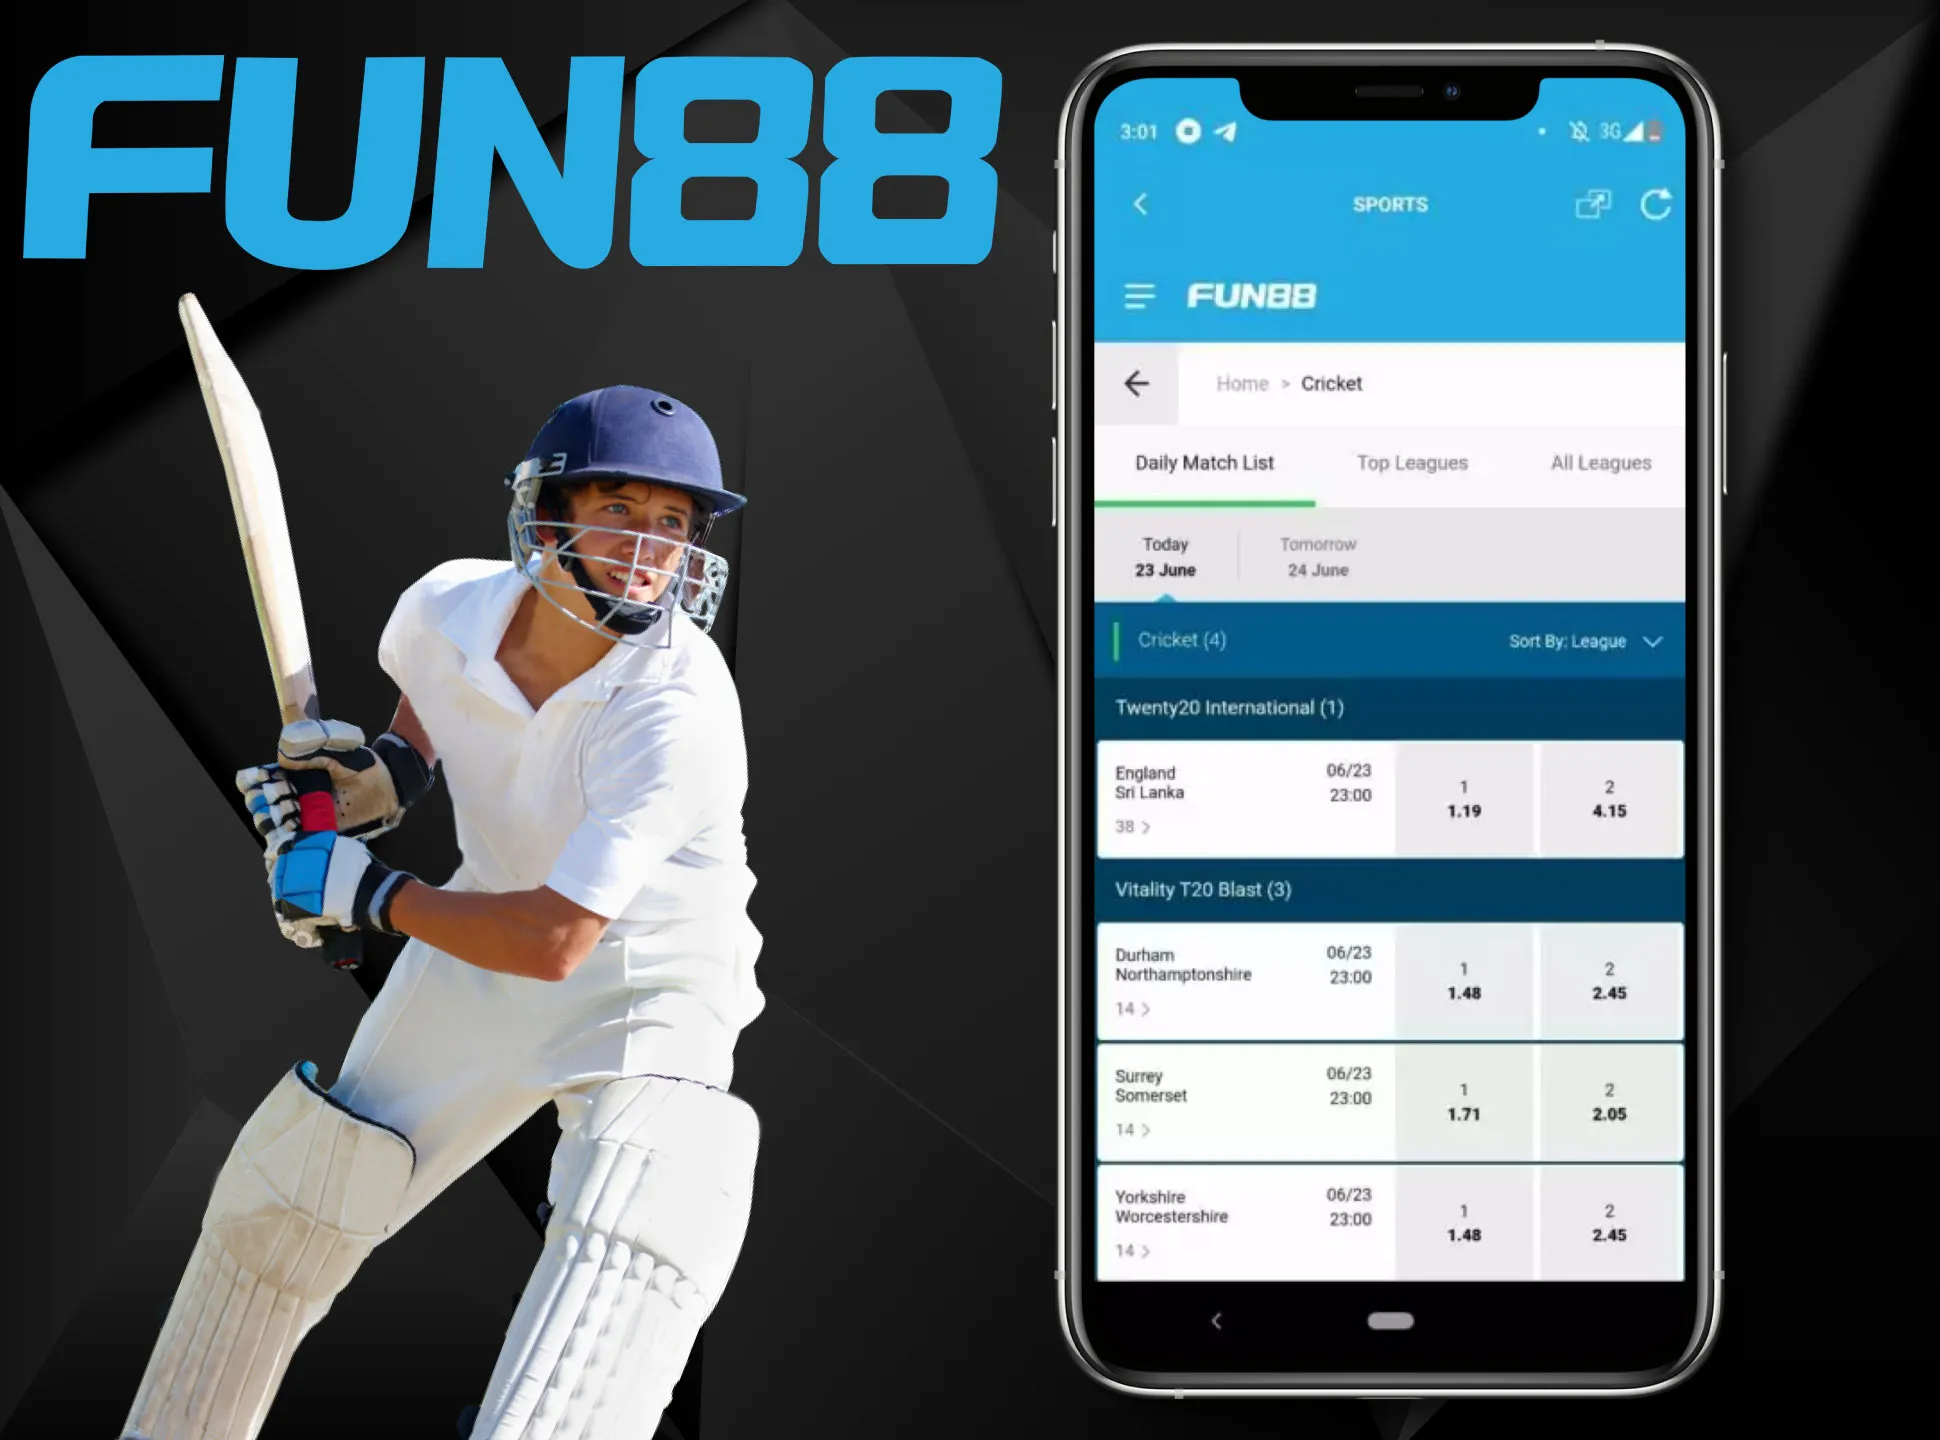 Download and install the Fun88 app to place bets on rupees.